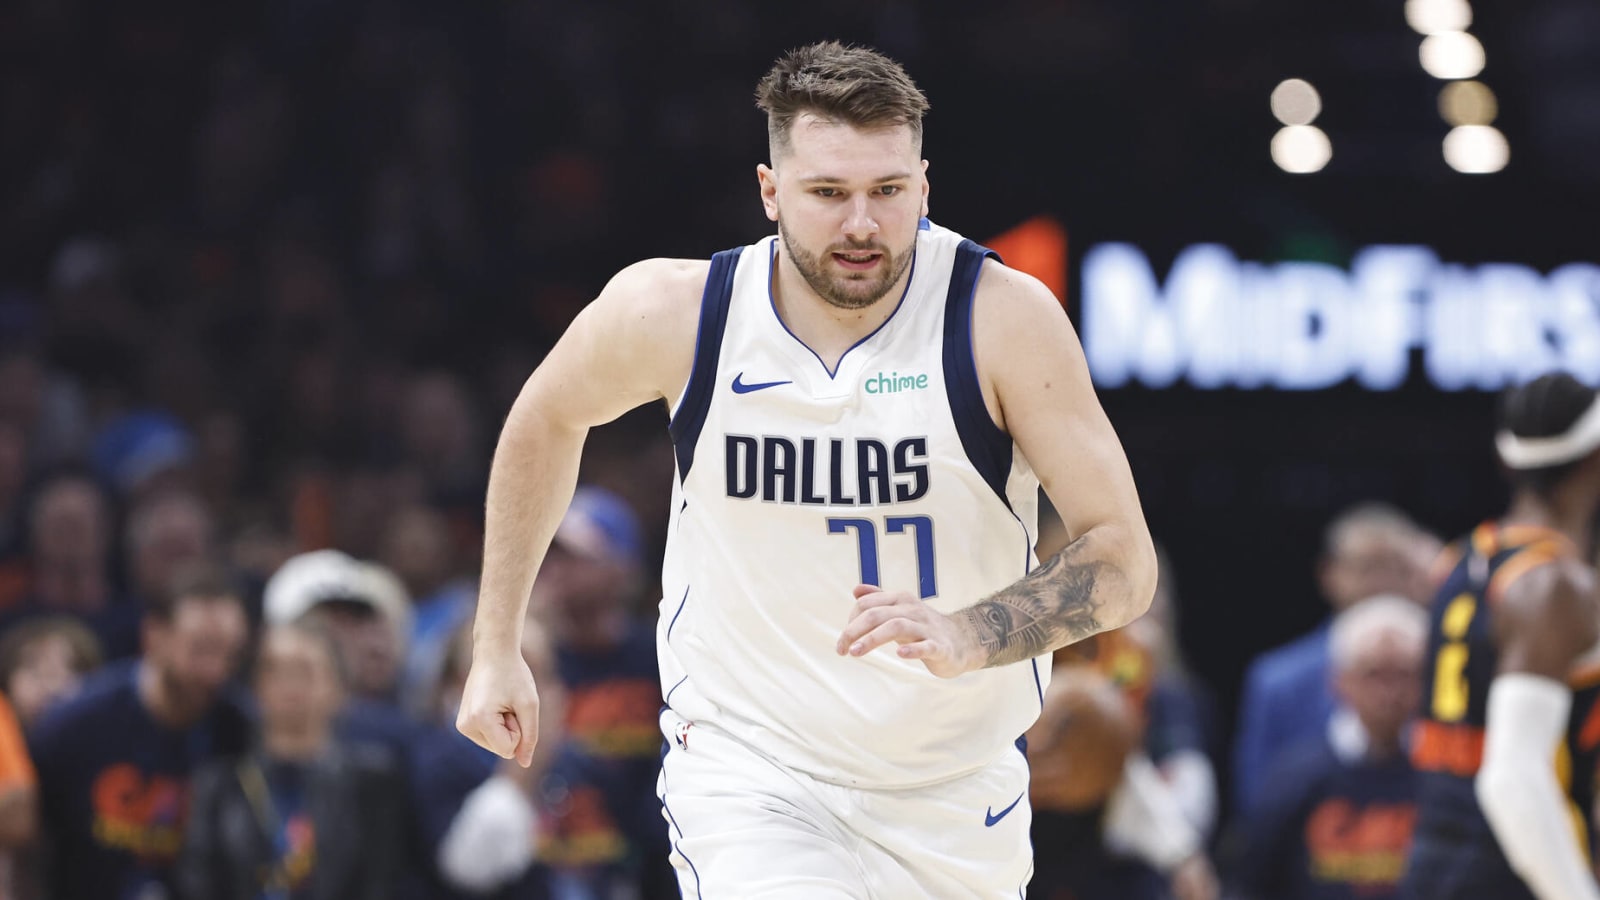 Luka Doncic has surprising take on taunts from Thunder fans